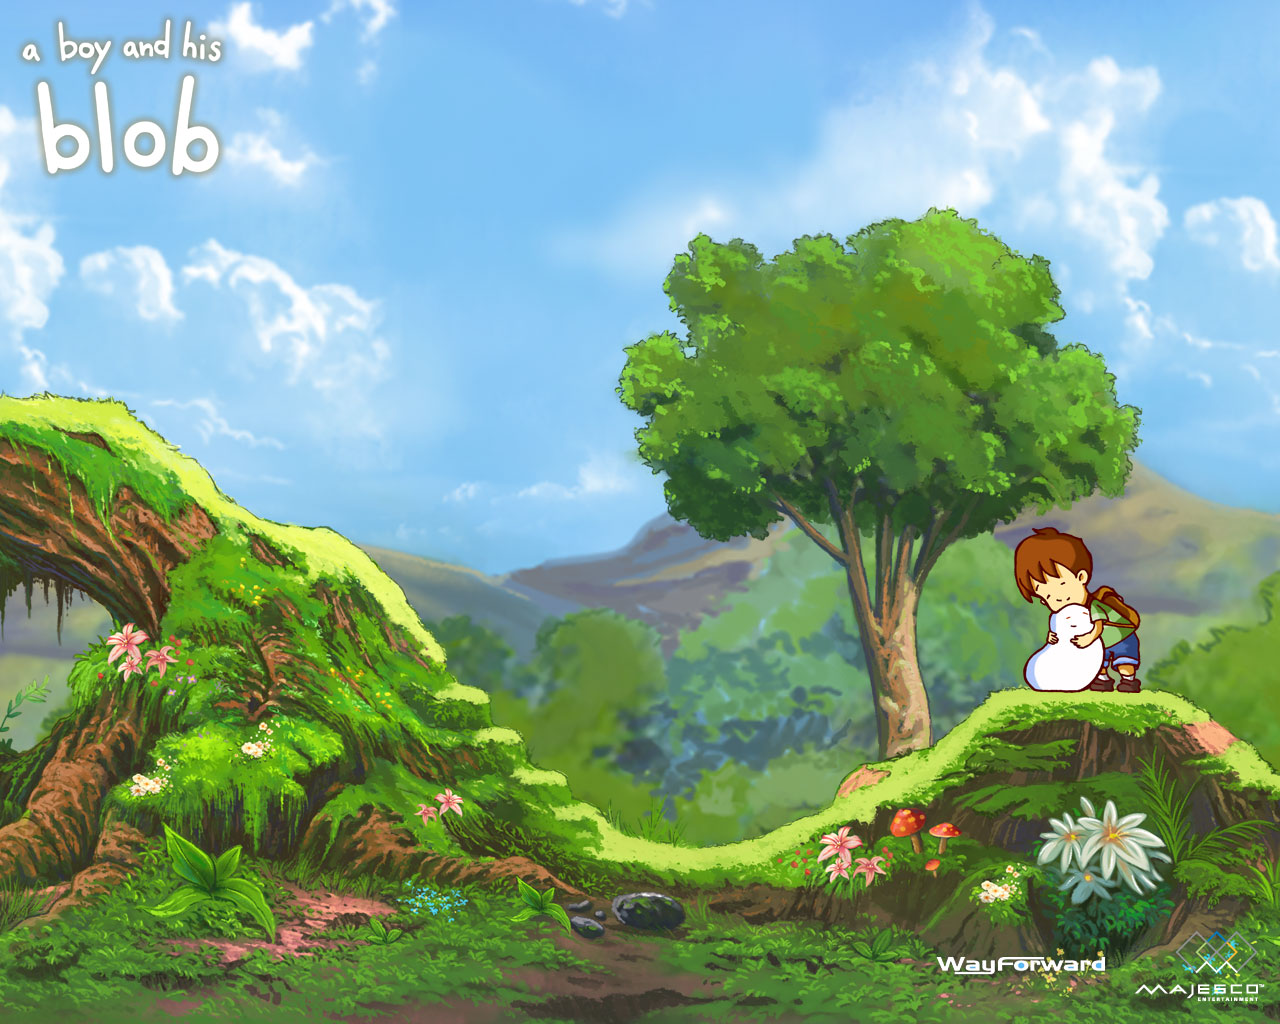 High Resolution Wallpaper | A Boy And His Blob 1280x1024 px